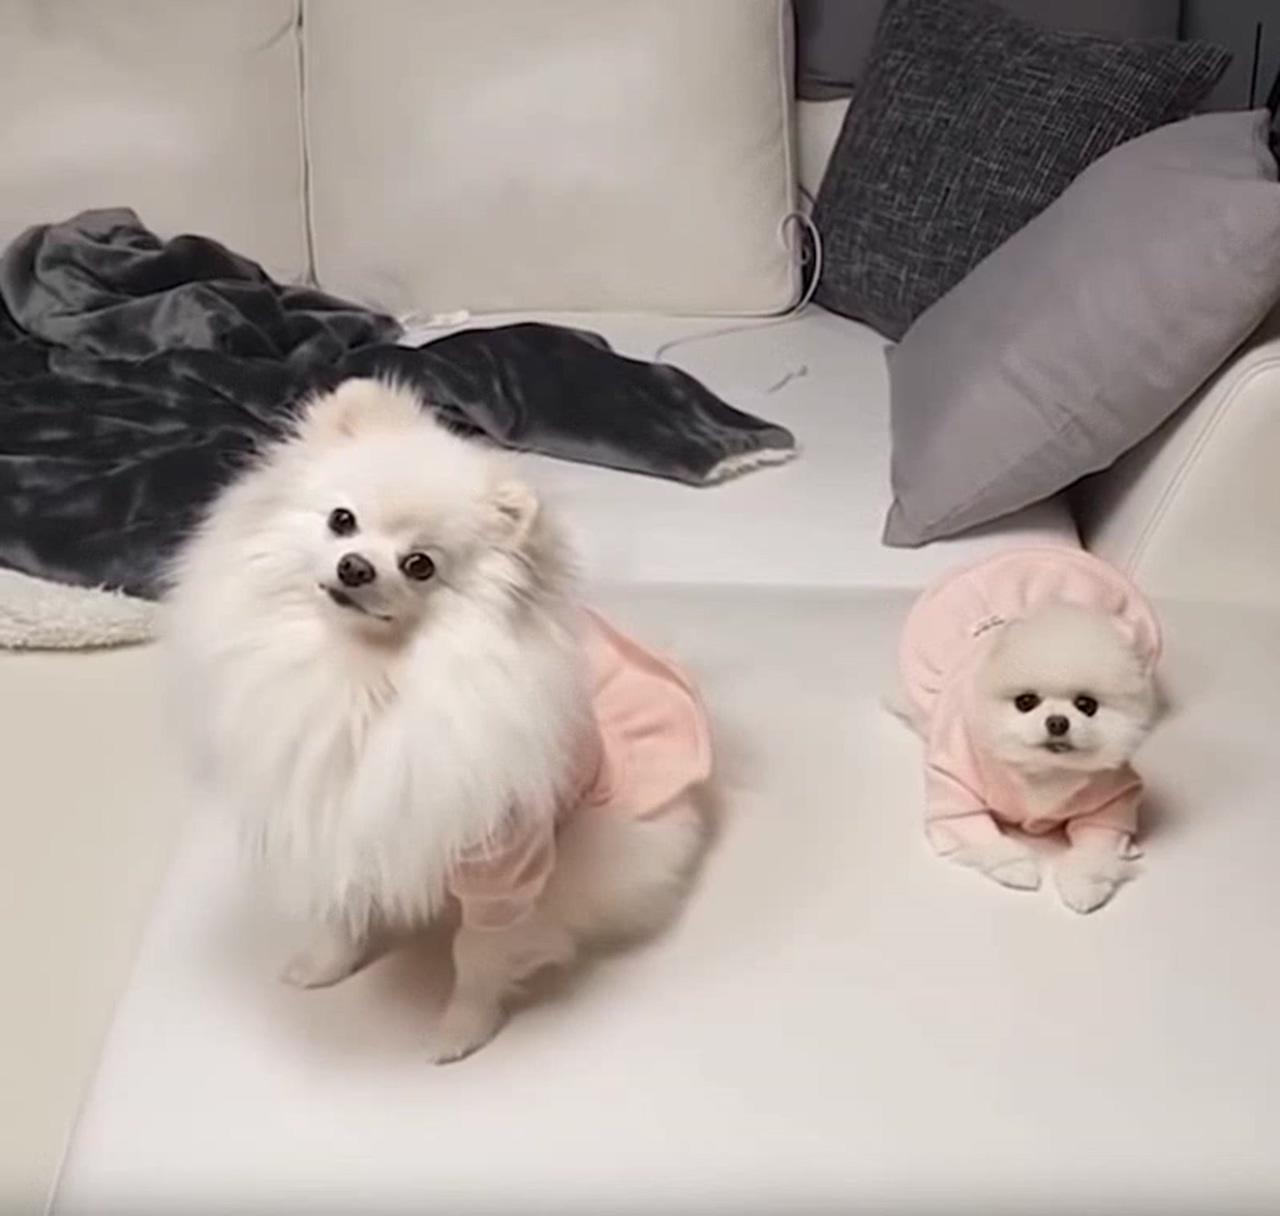 Adorable dogs; cute teacup puppies